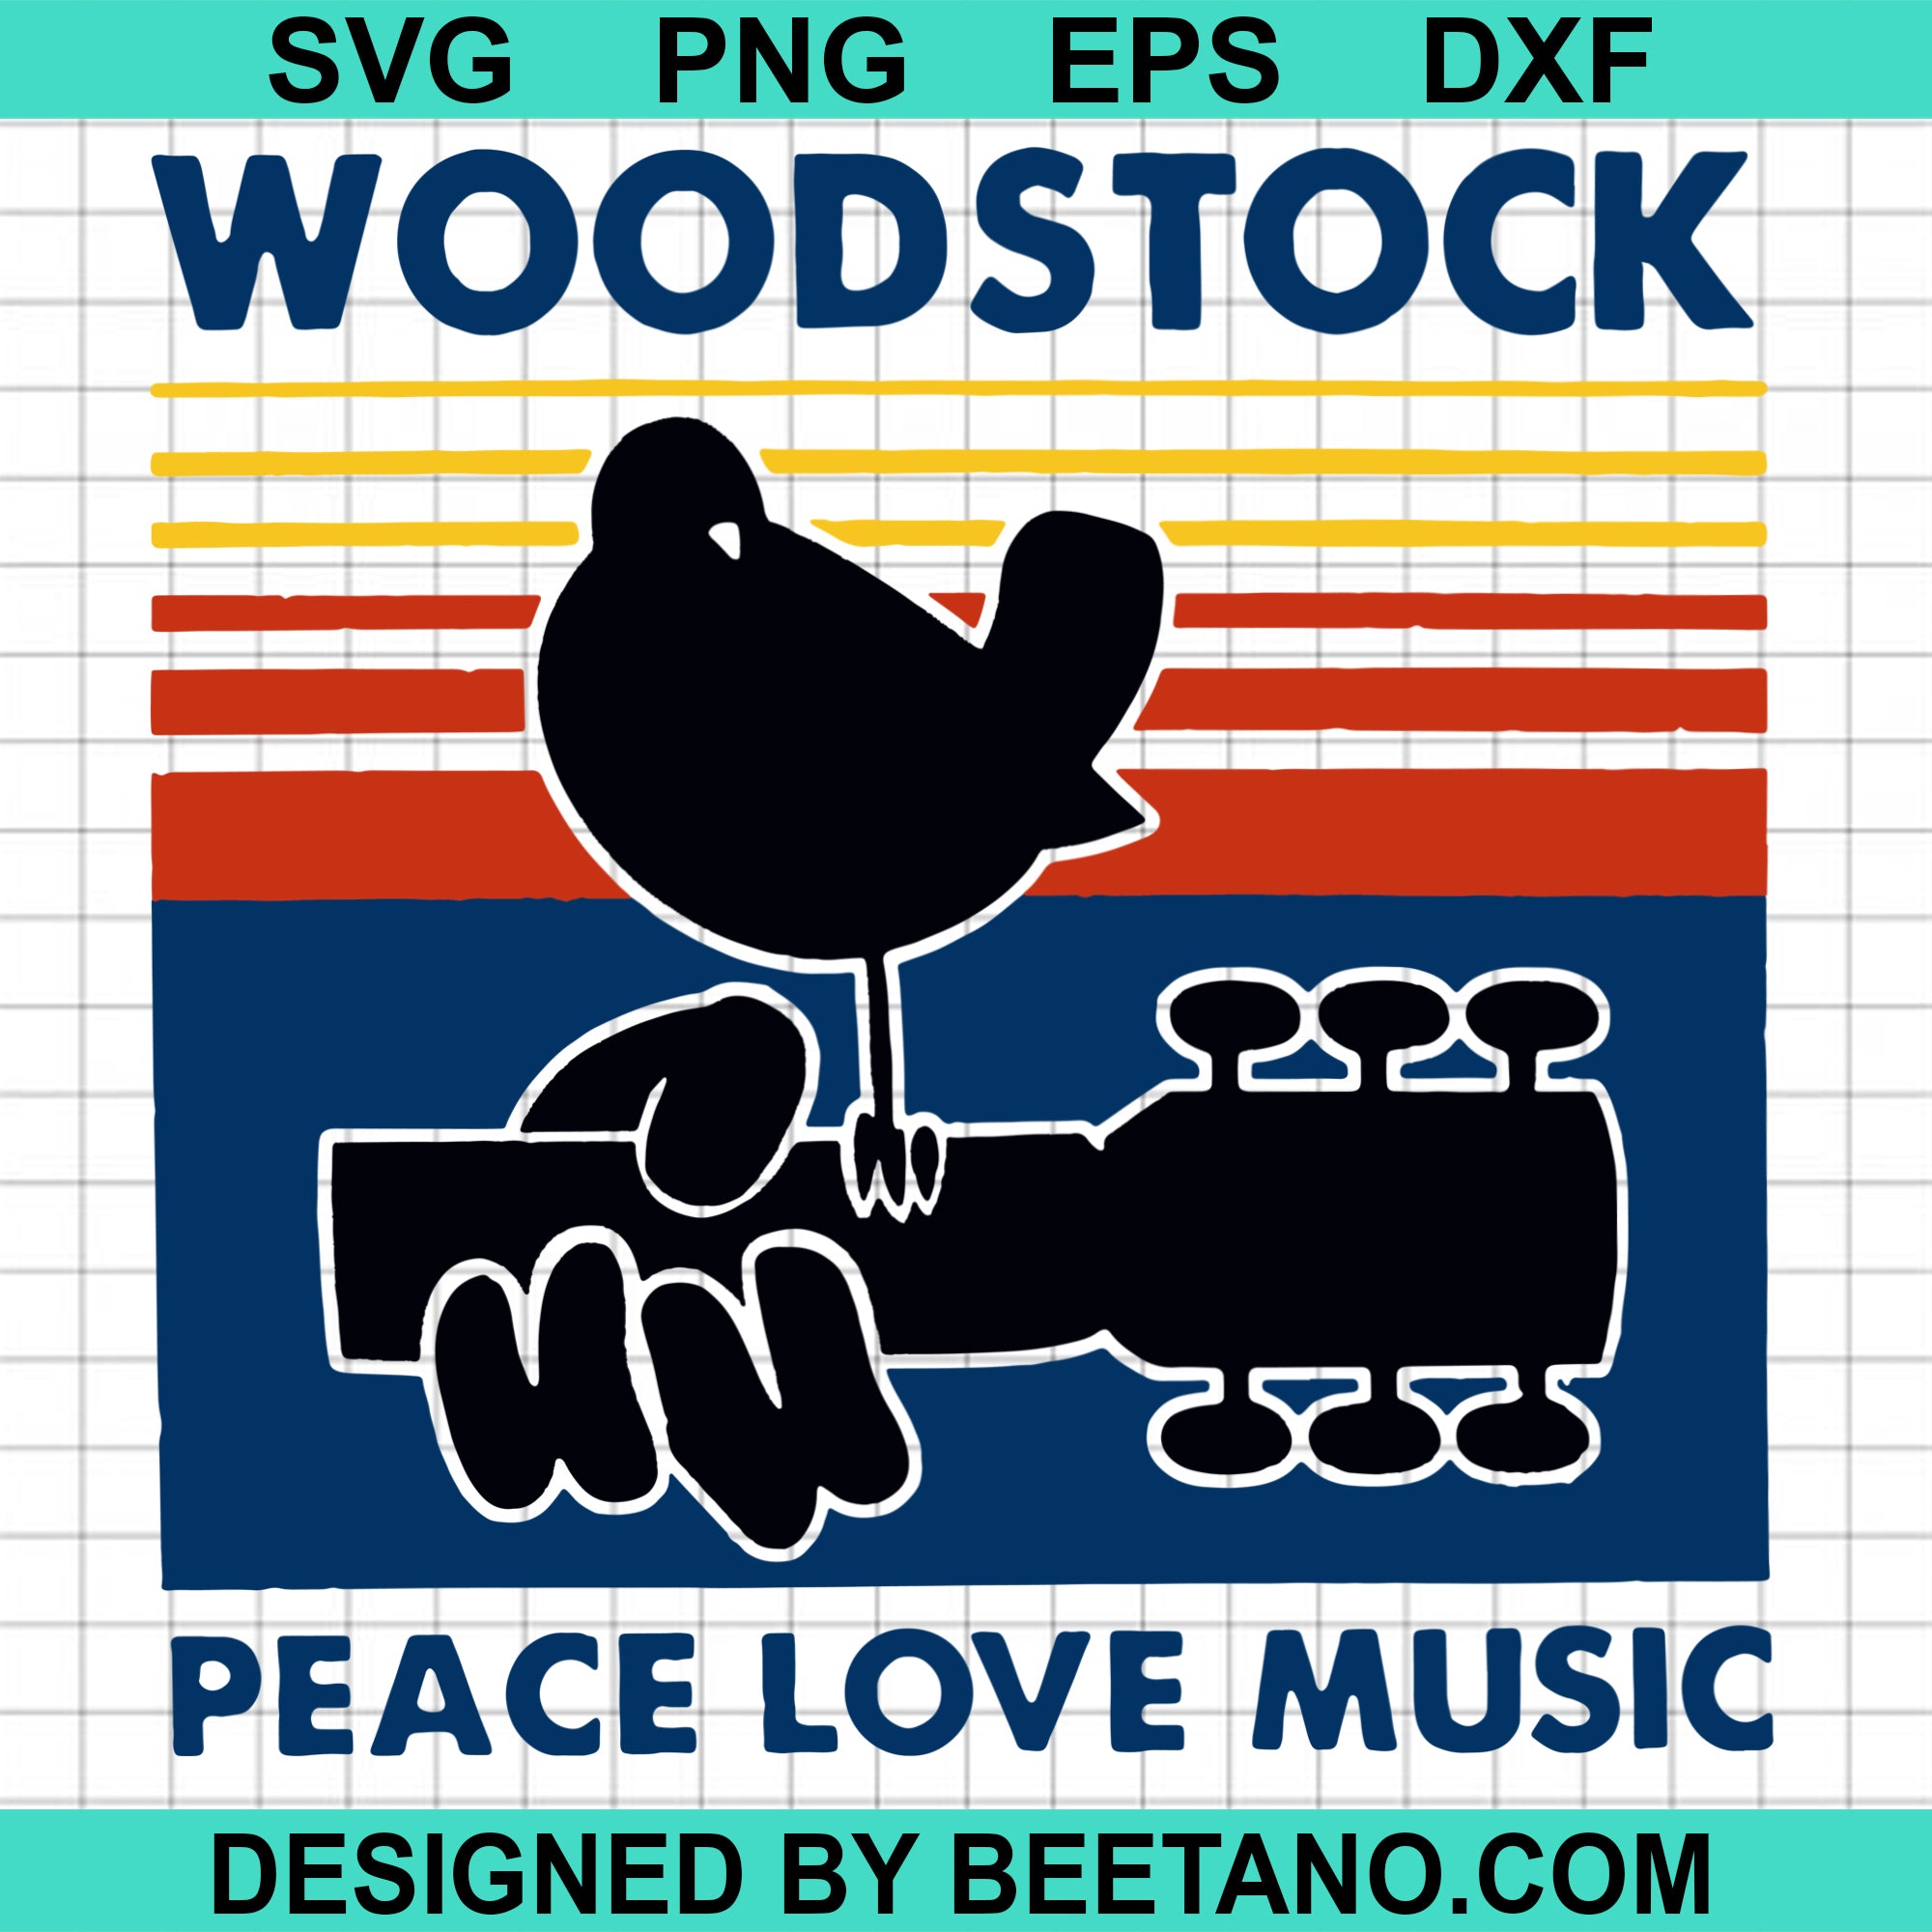 Download Woodstock Peace Love Music High Quality Svg Cut Files Best For Handmade Unique Craft